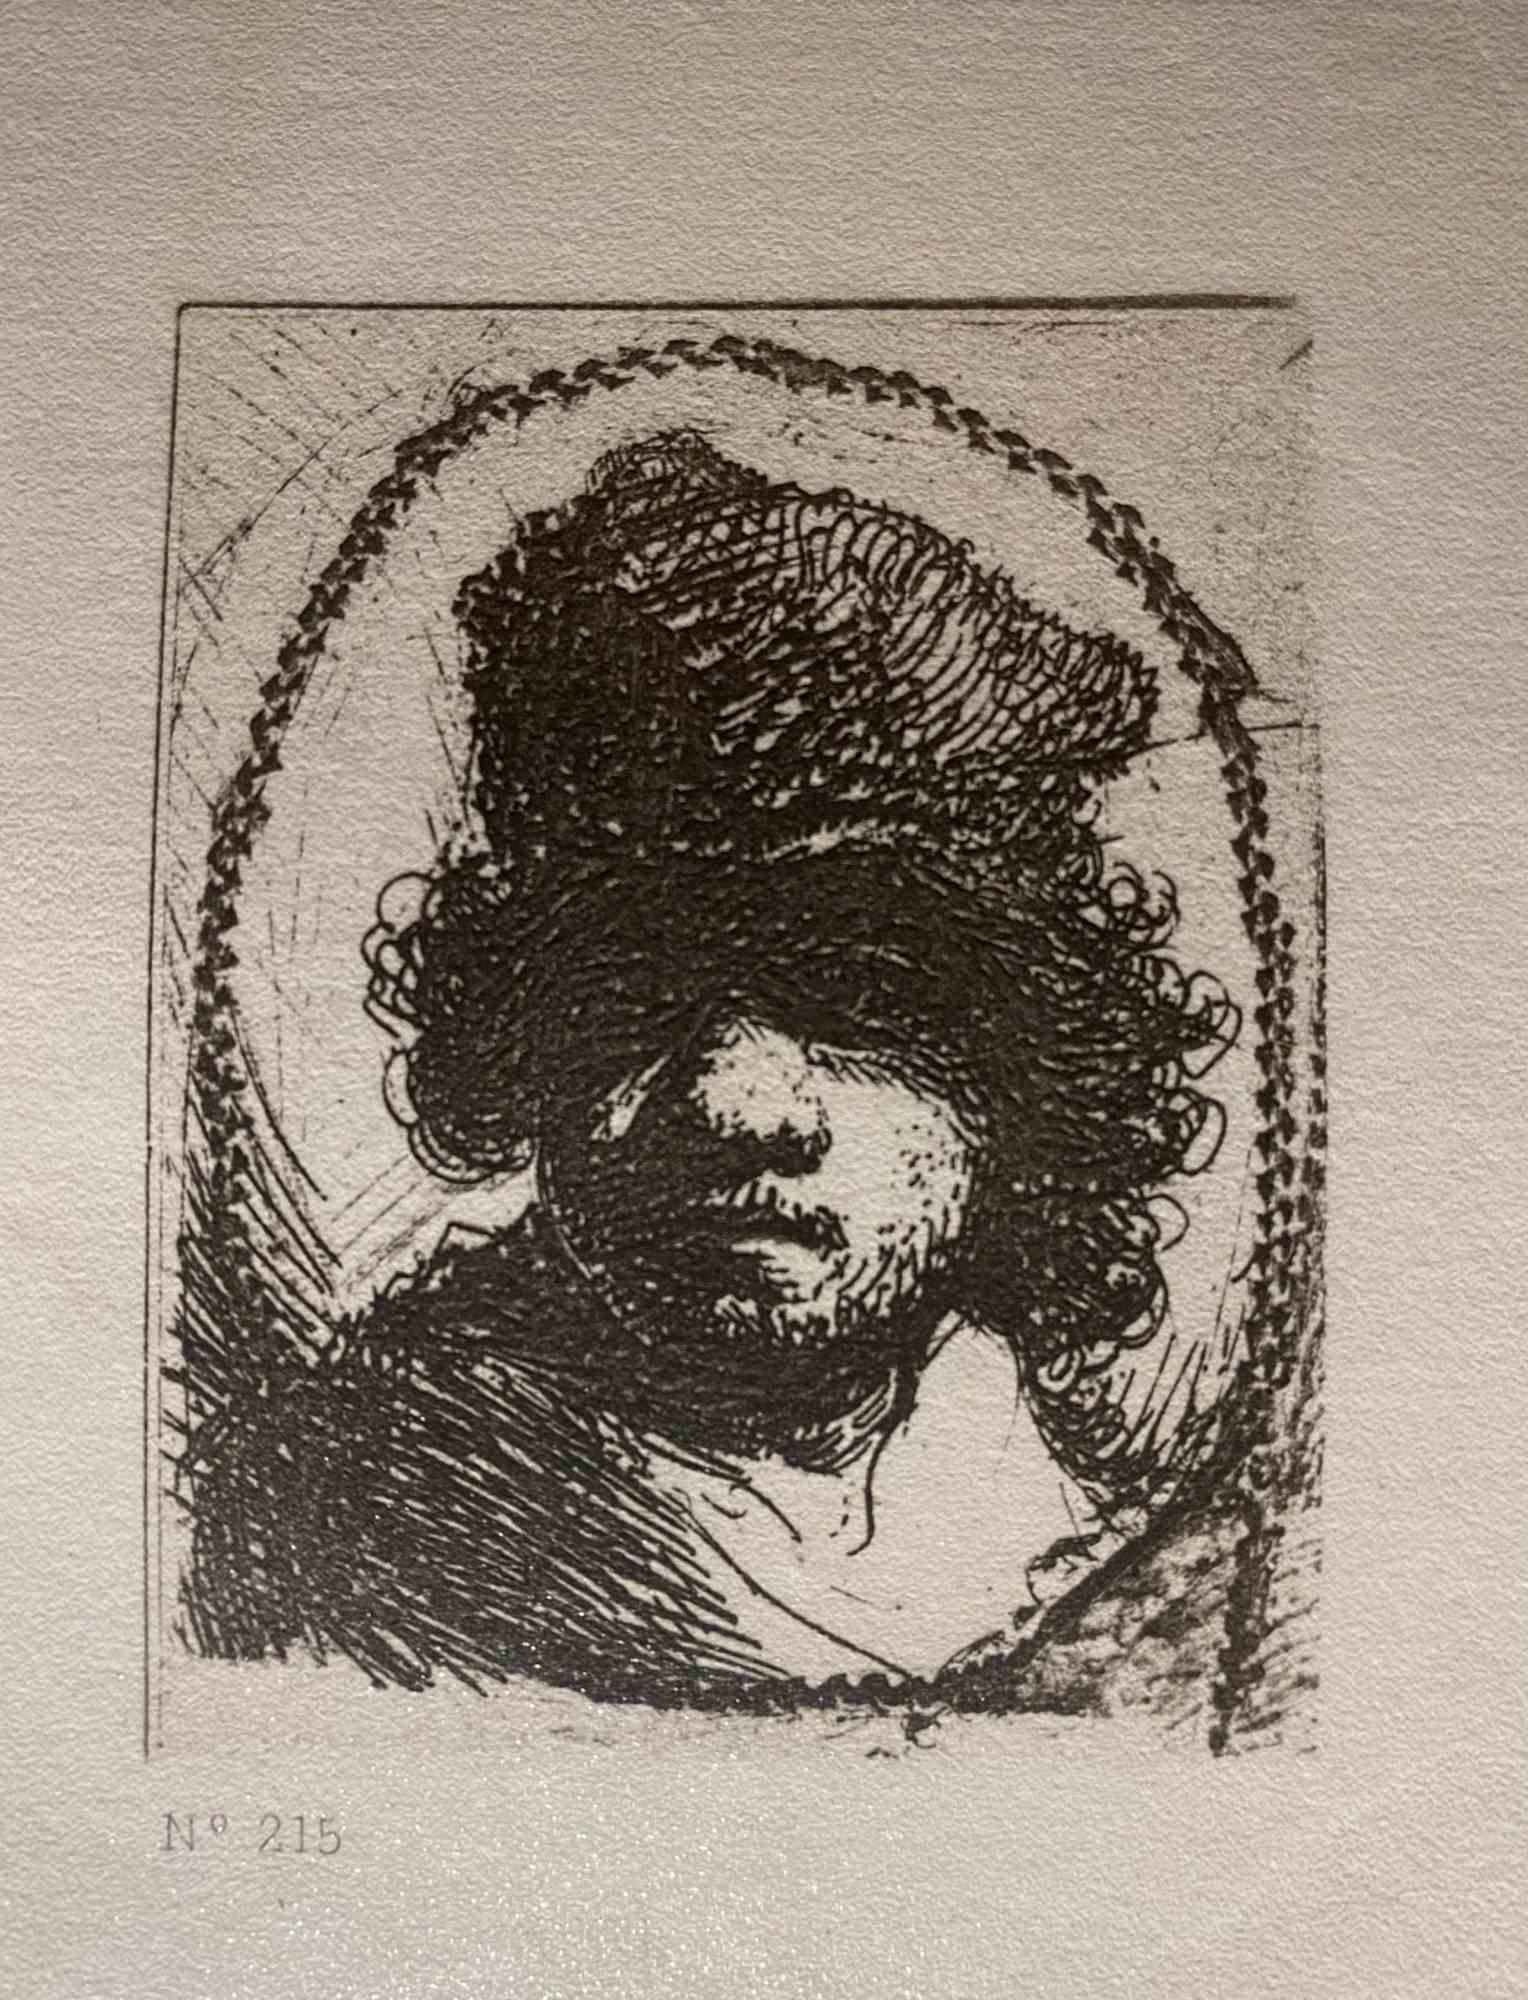 Charles Amand Durand Portrait Print - Self-Portrait in a Fur Cap - Engraving after Rembrandt - 19th Century